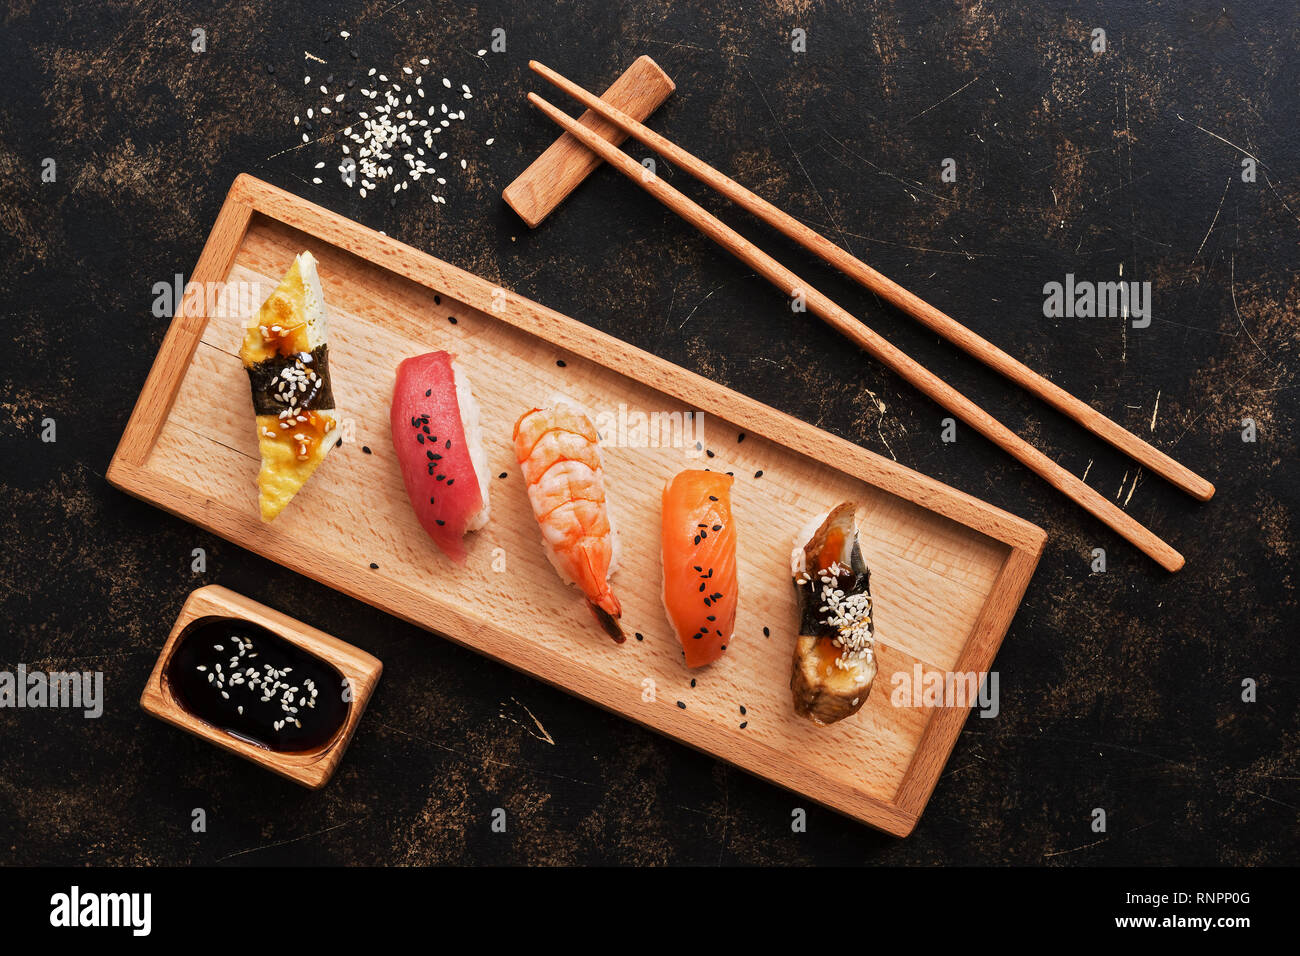 Ebi Roll High Resolution Stock Photography and Images - Alamy